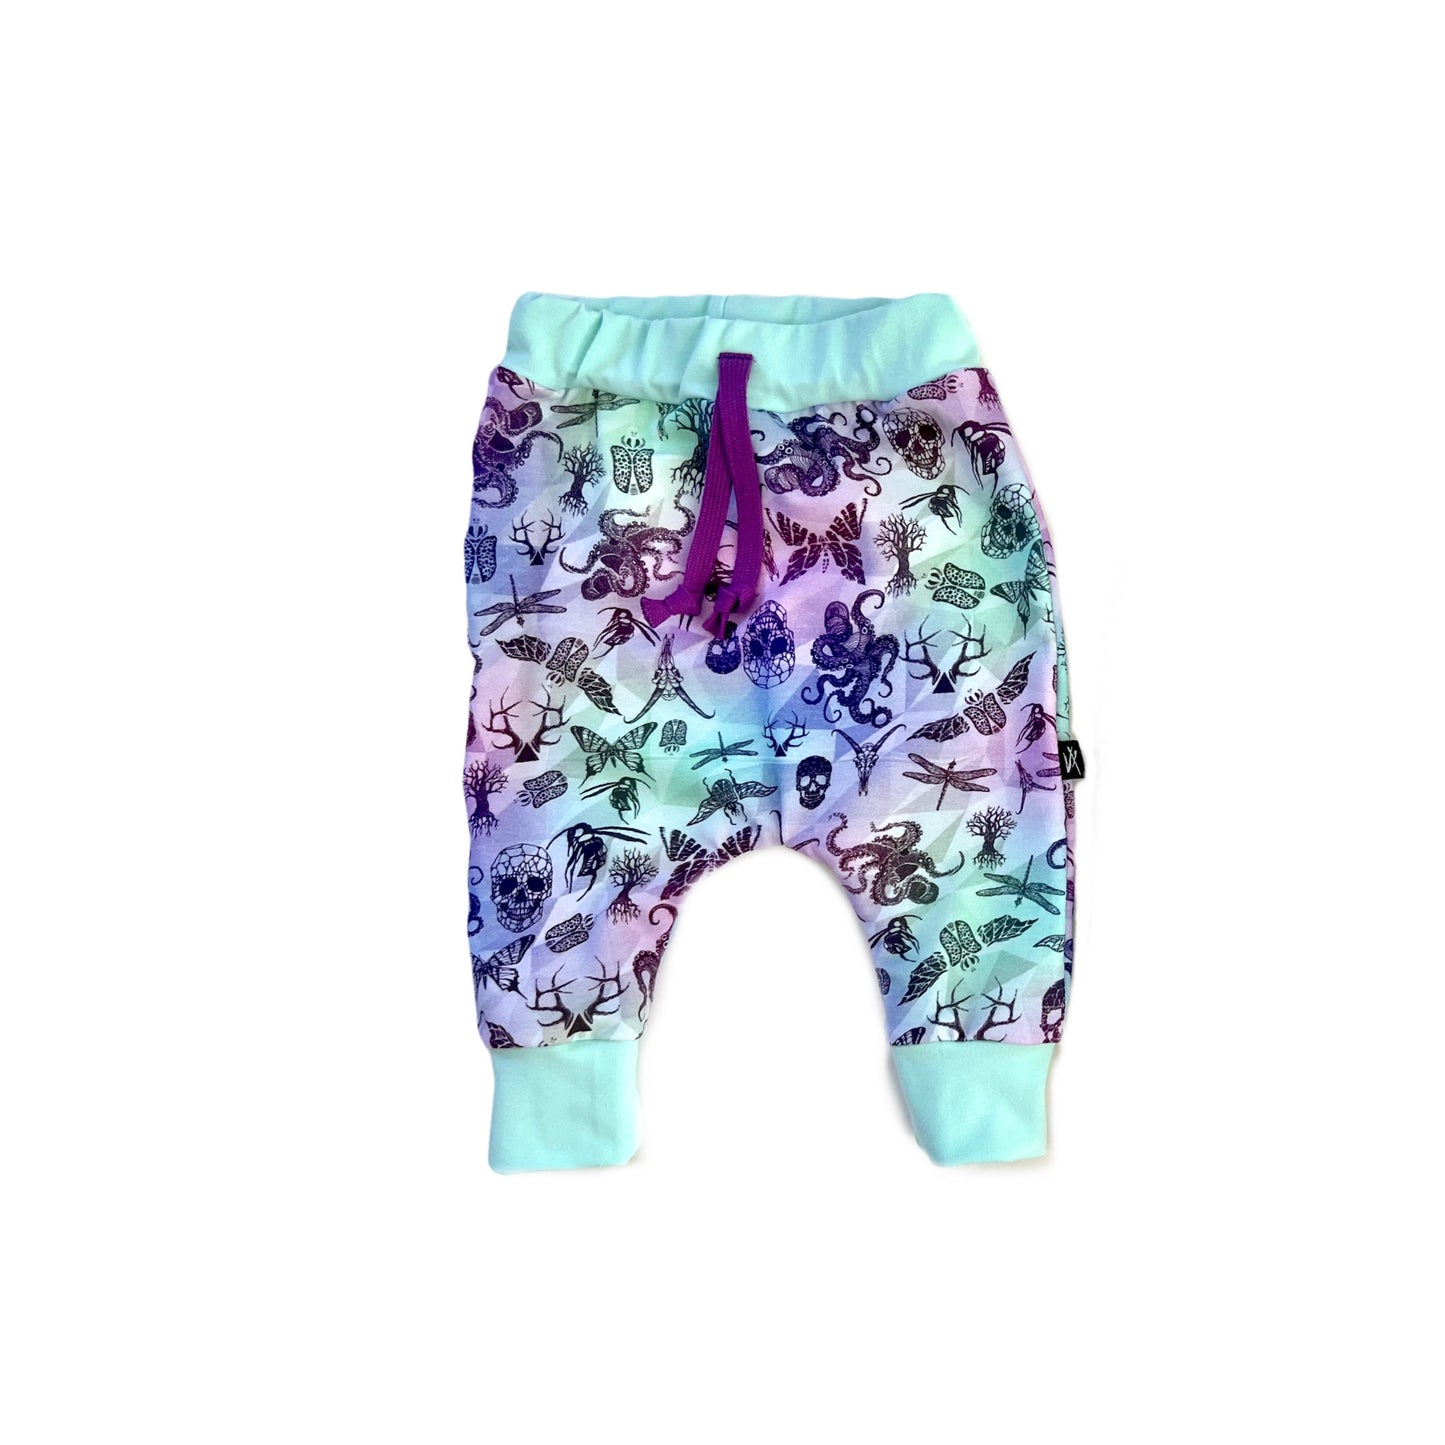 Airbrushed Ink Jogger - Purple/Mint